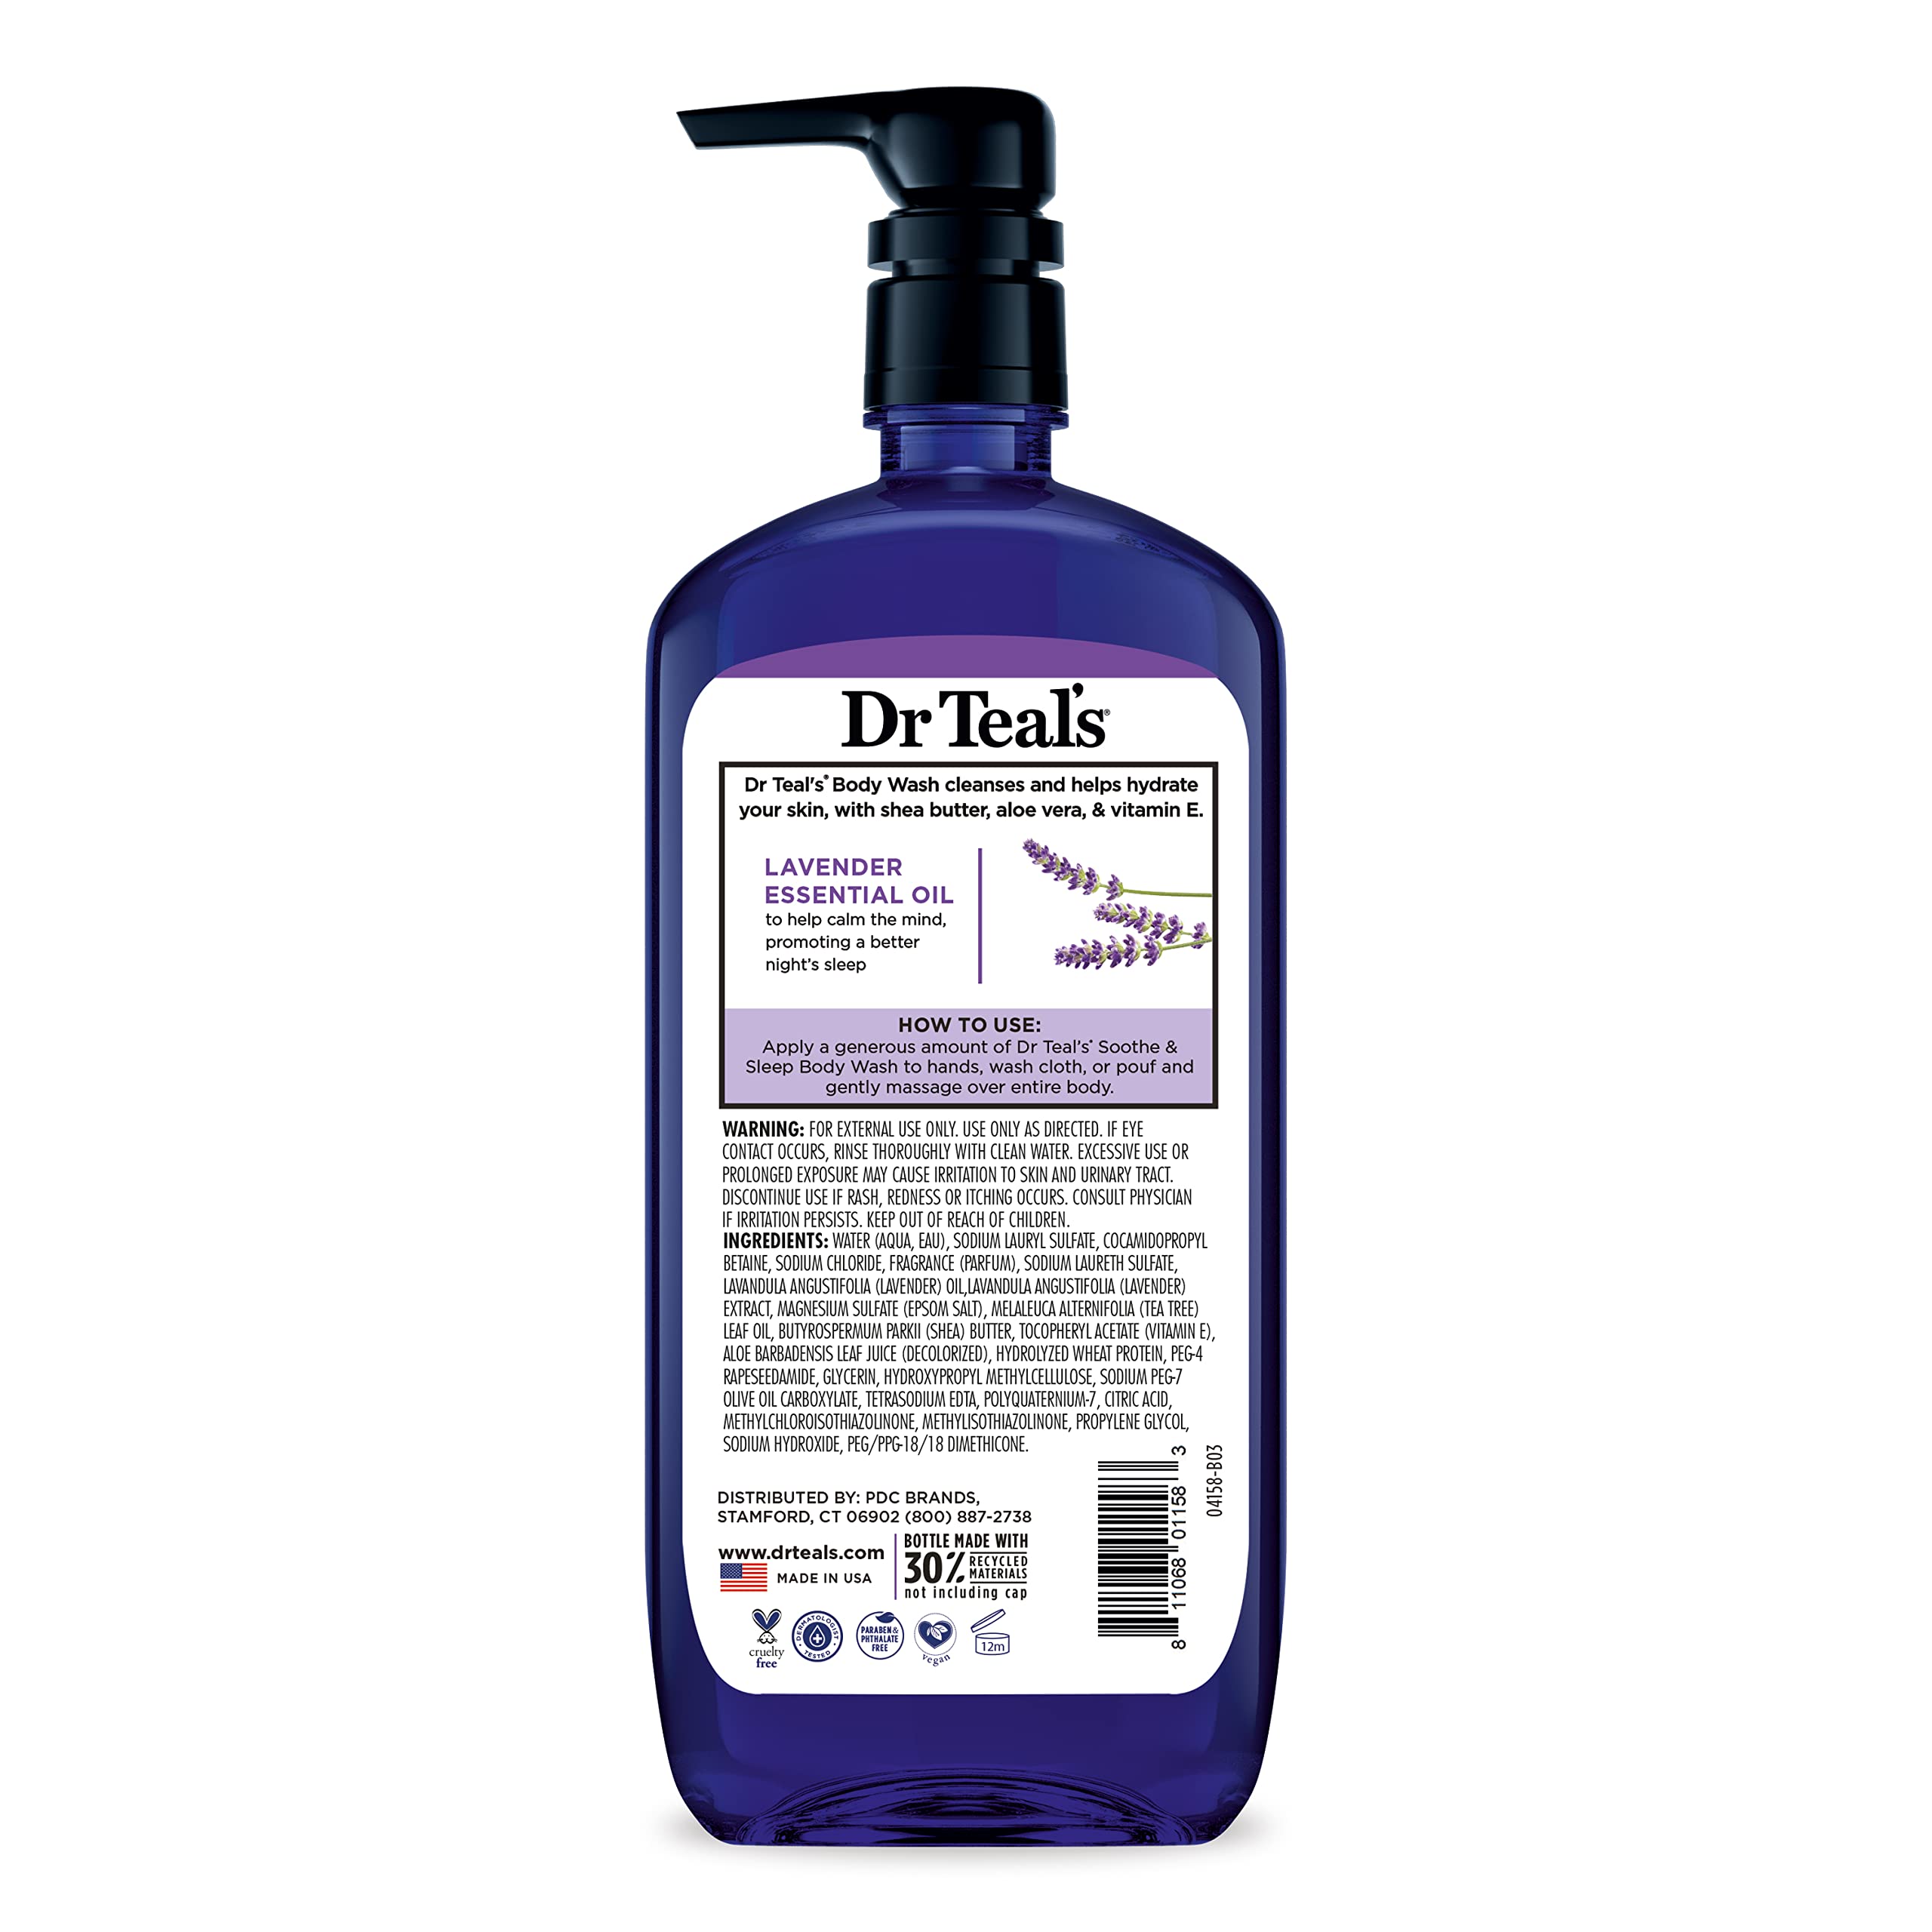 Dr Teal's Body Wash with Pure Epsom Salt, Soothe & Sleep with Lavender, 24 fl oz (Pack of 4) (Packaging May Vary)